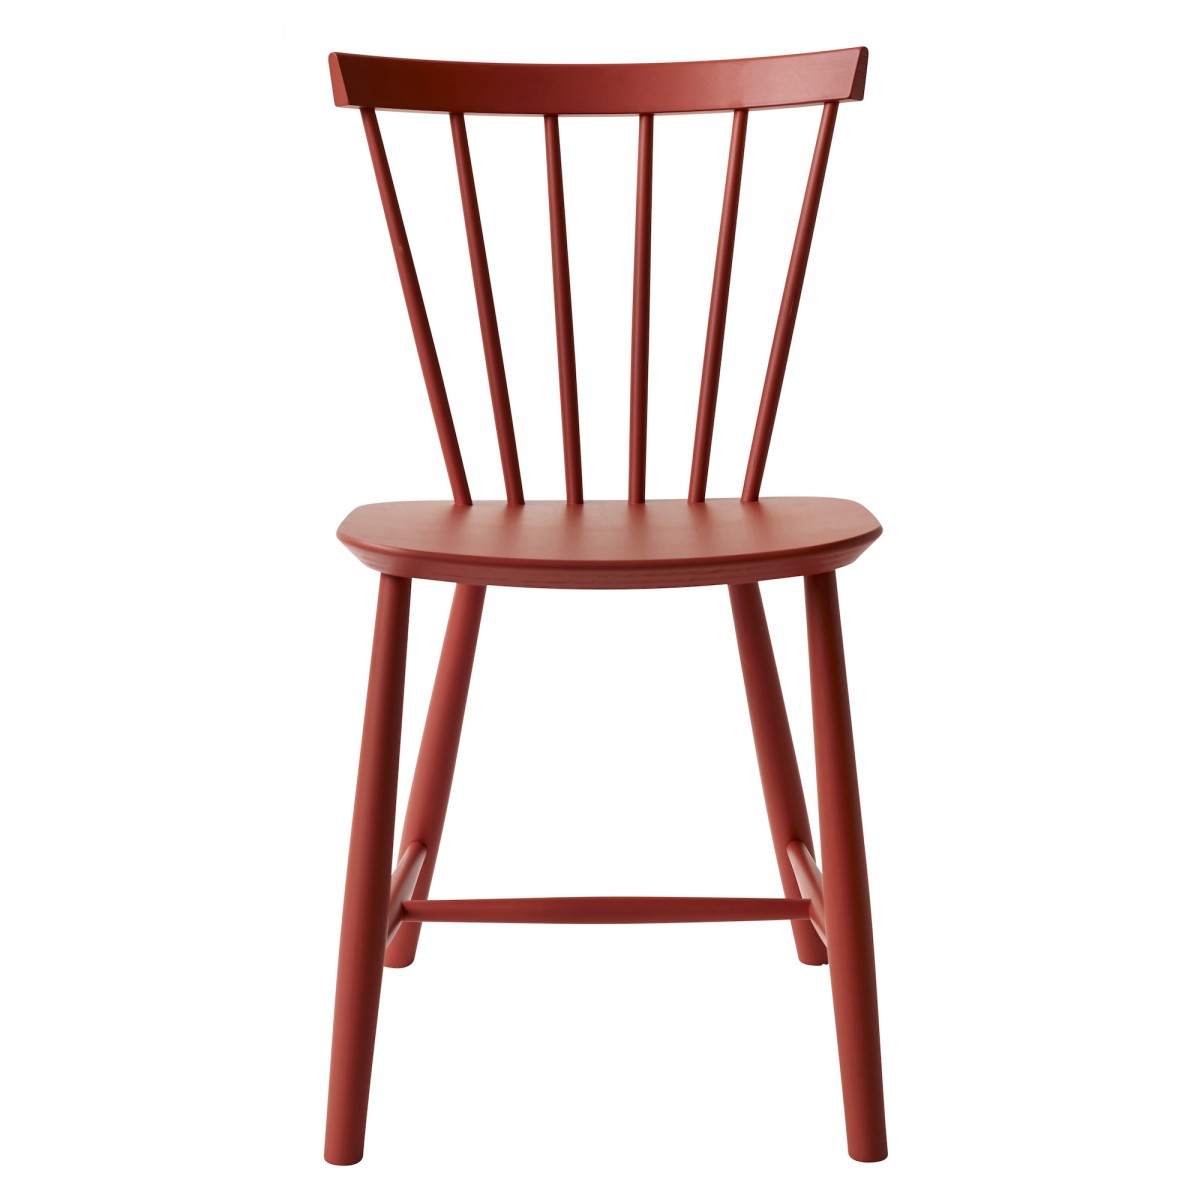 Red J46 chair